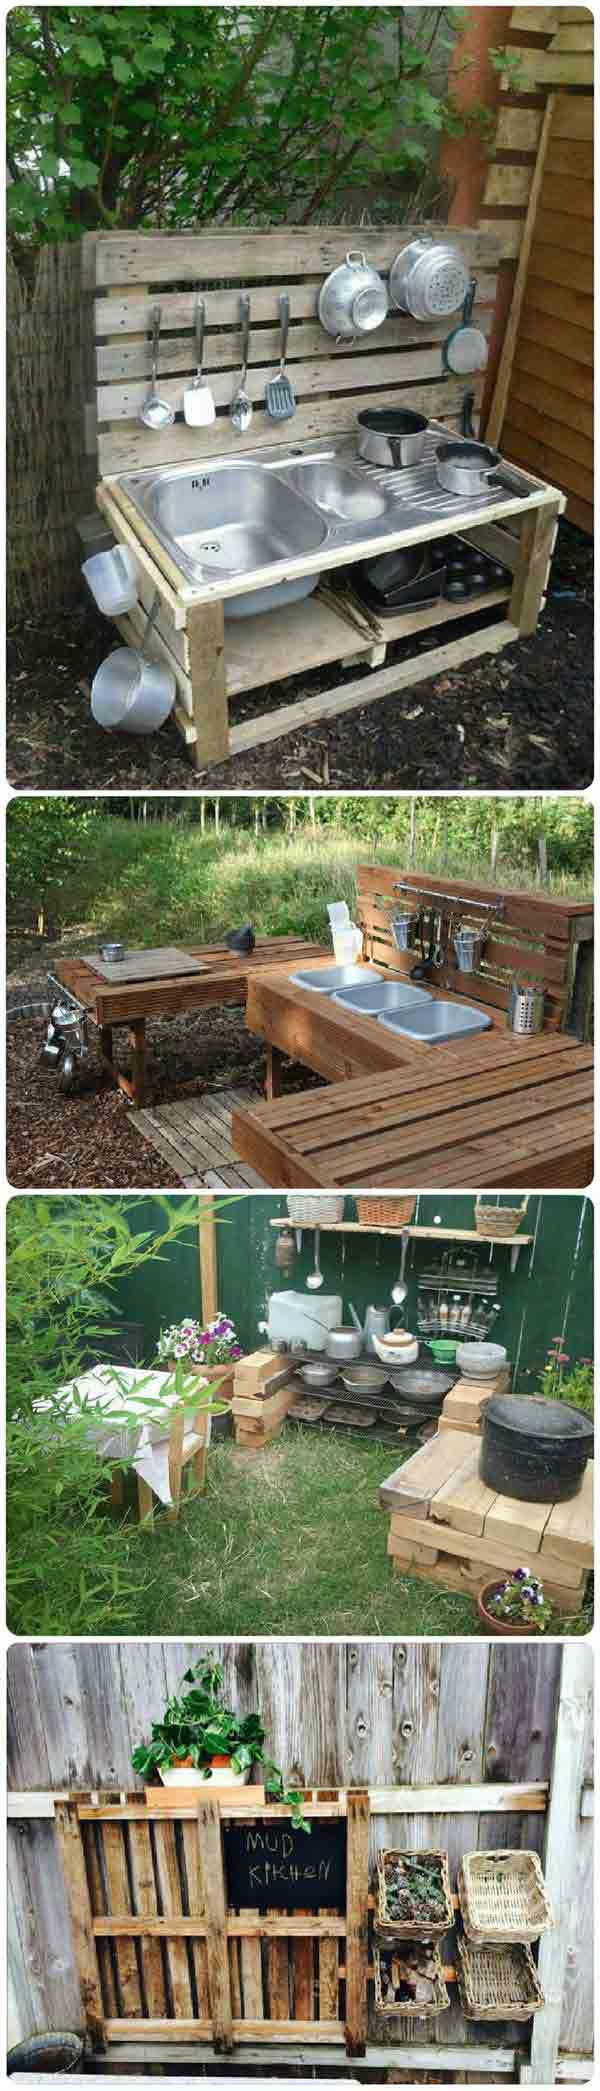 #17 CREATE AN OUTDOOR KITCHEN AND EDUCATE YOUR KIDS THROUGH PLAY